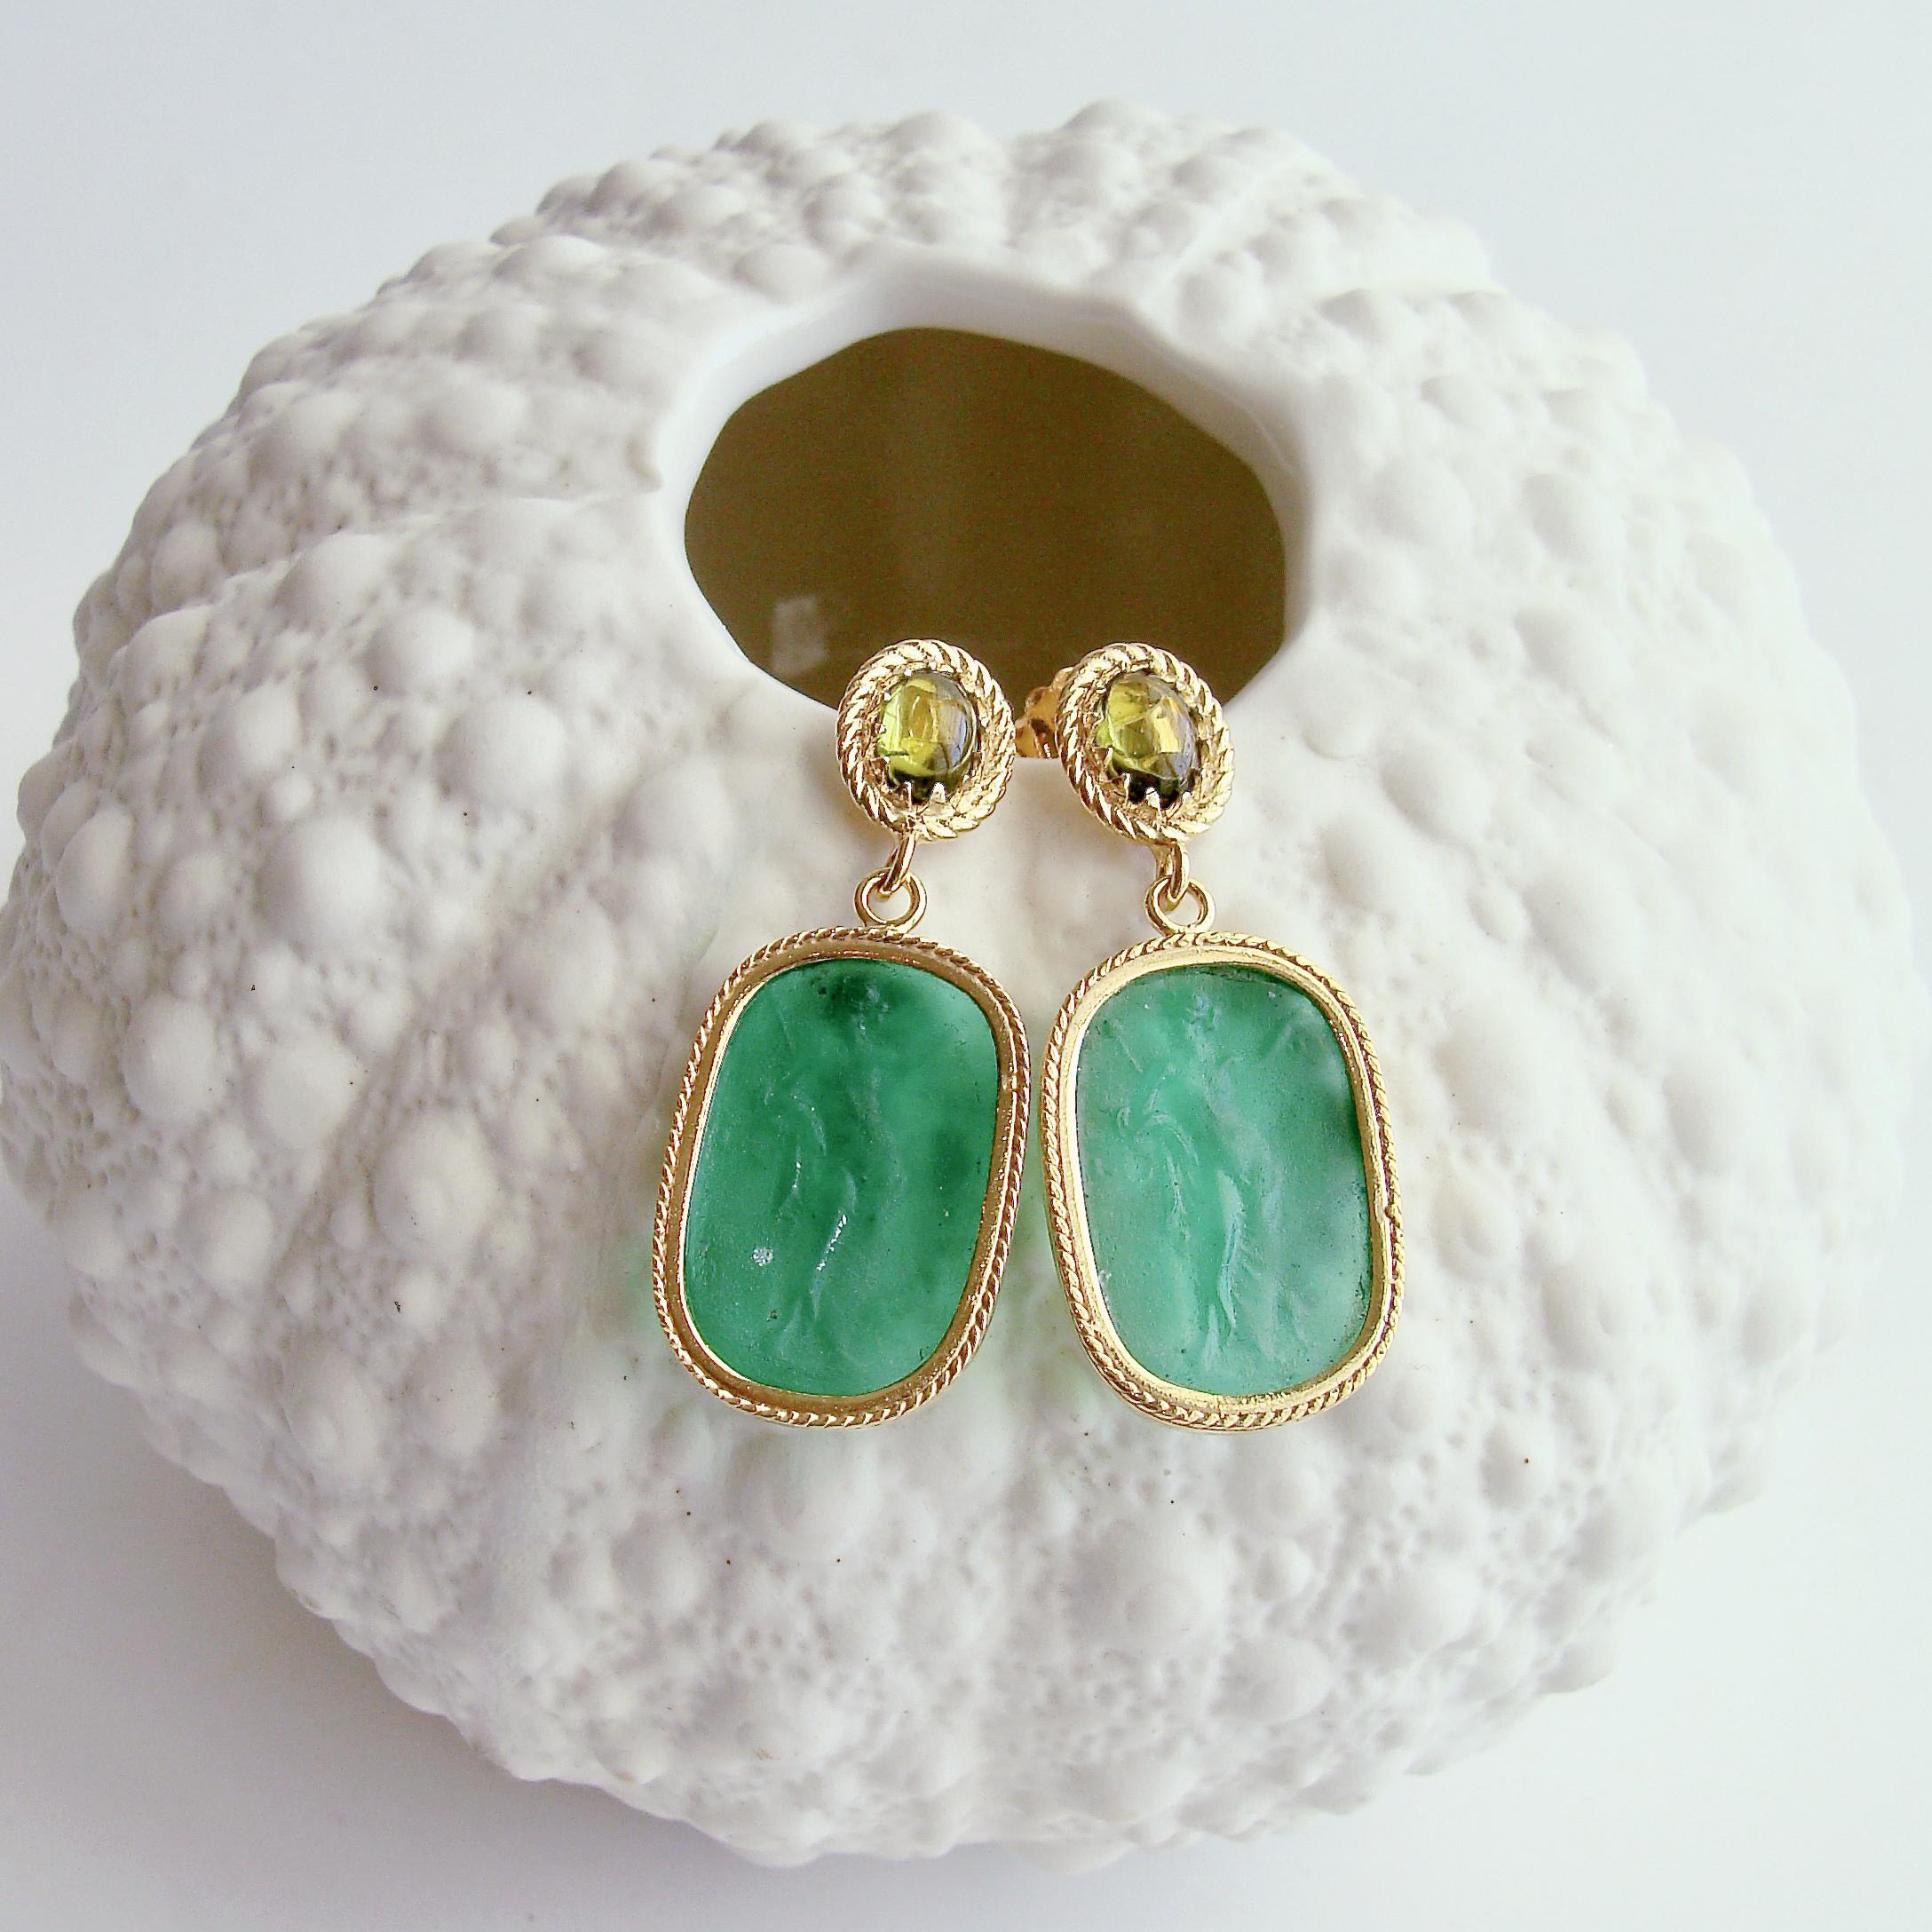 Rich emerald green Venetian glass Neoclassical intaglios sway gently below a pair of smooth peridot post style earrings to create these sunning neoclassical earrings.  The draped goddess is an often recreated style and this particular one has been